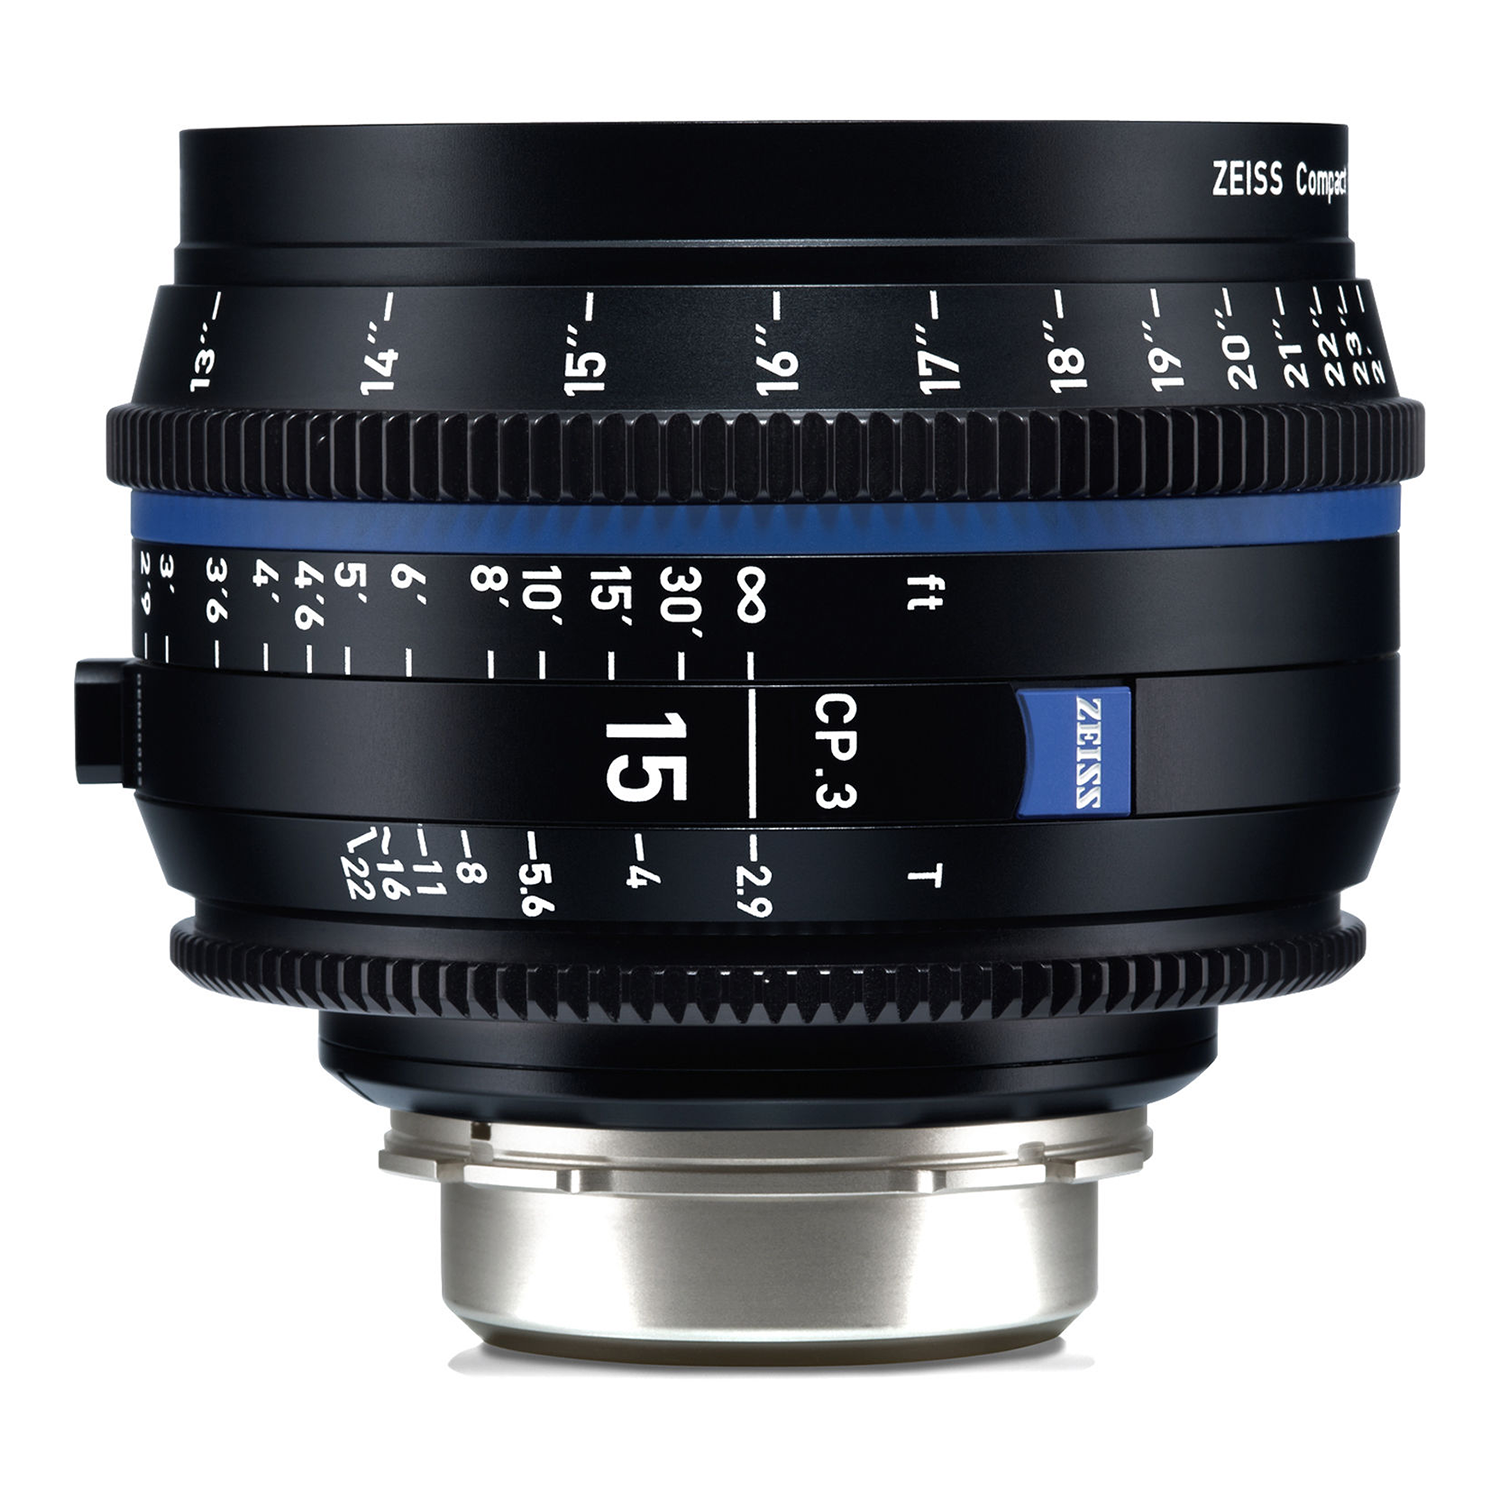 Zeiss CP.3 Compact Prime Lens 15mm/T2.9